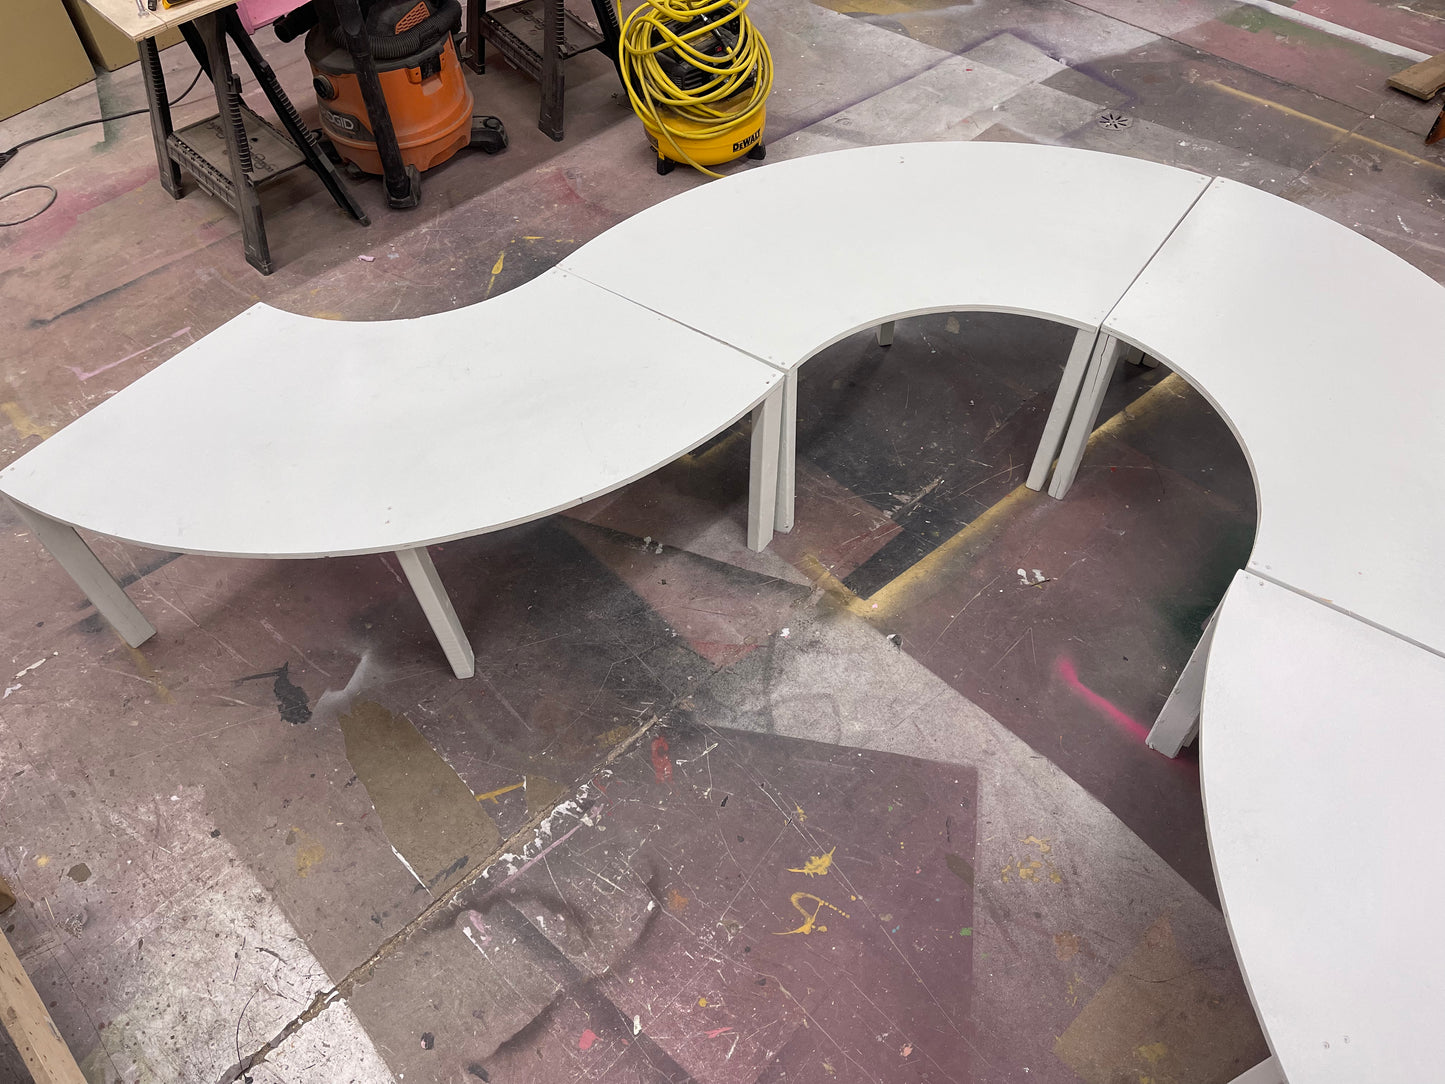 2 in 1 CHILD SIZE SERPENTINE TABLE